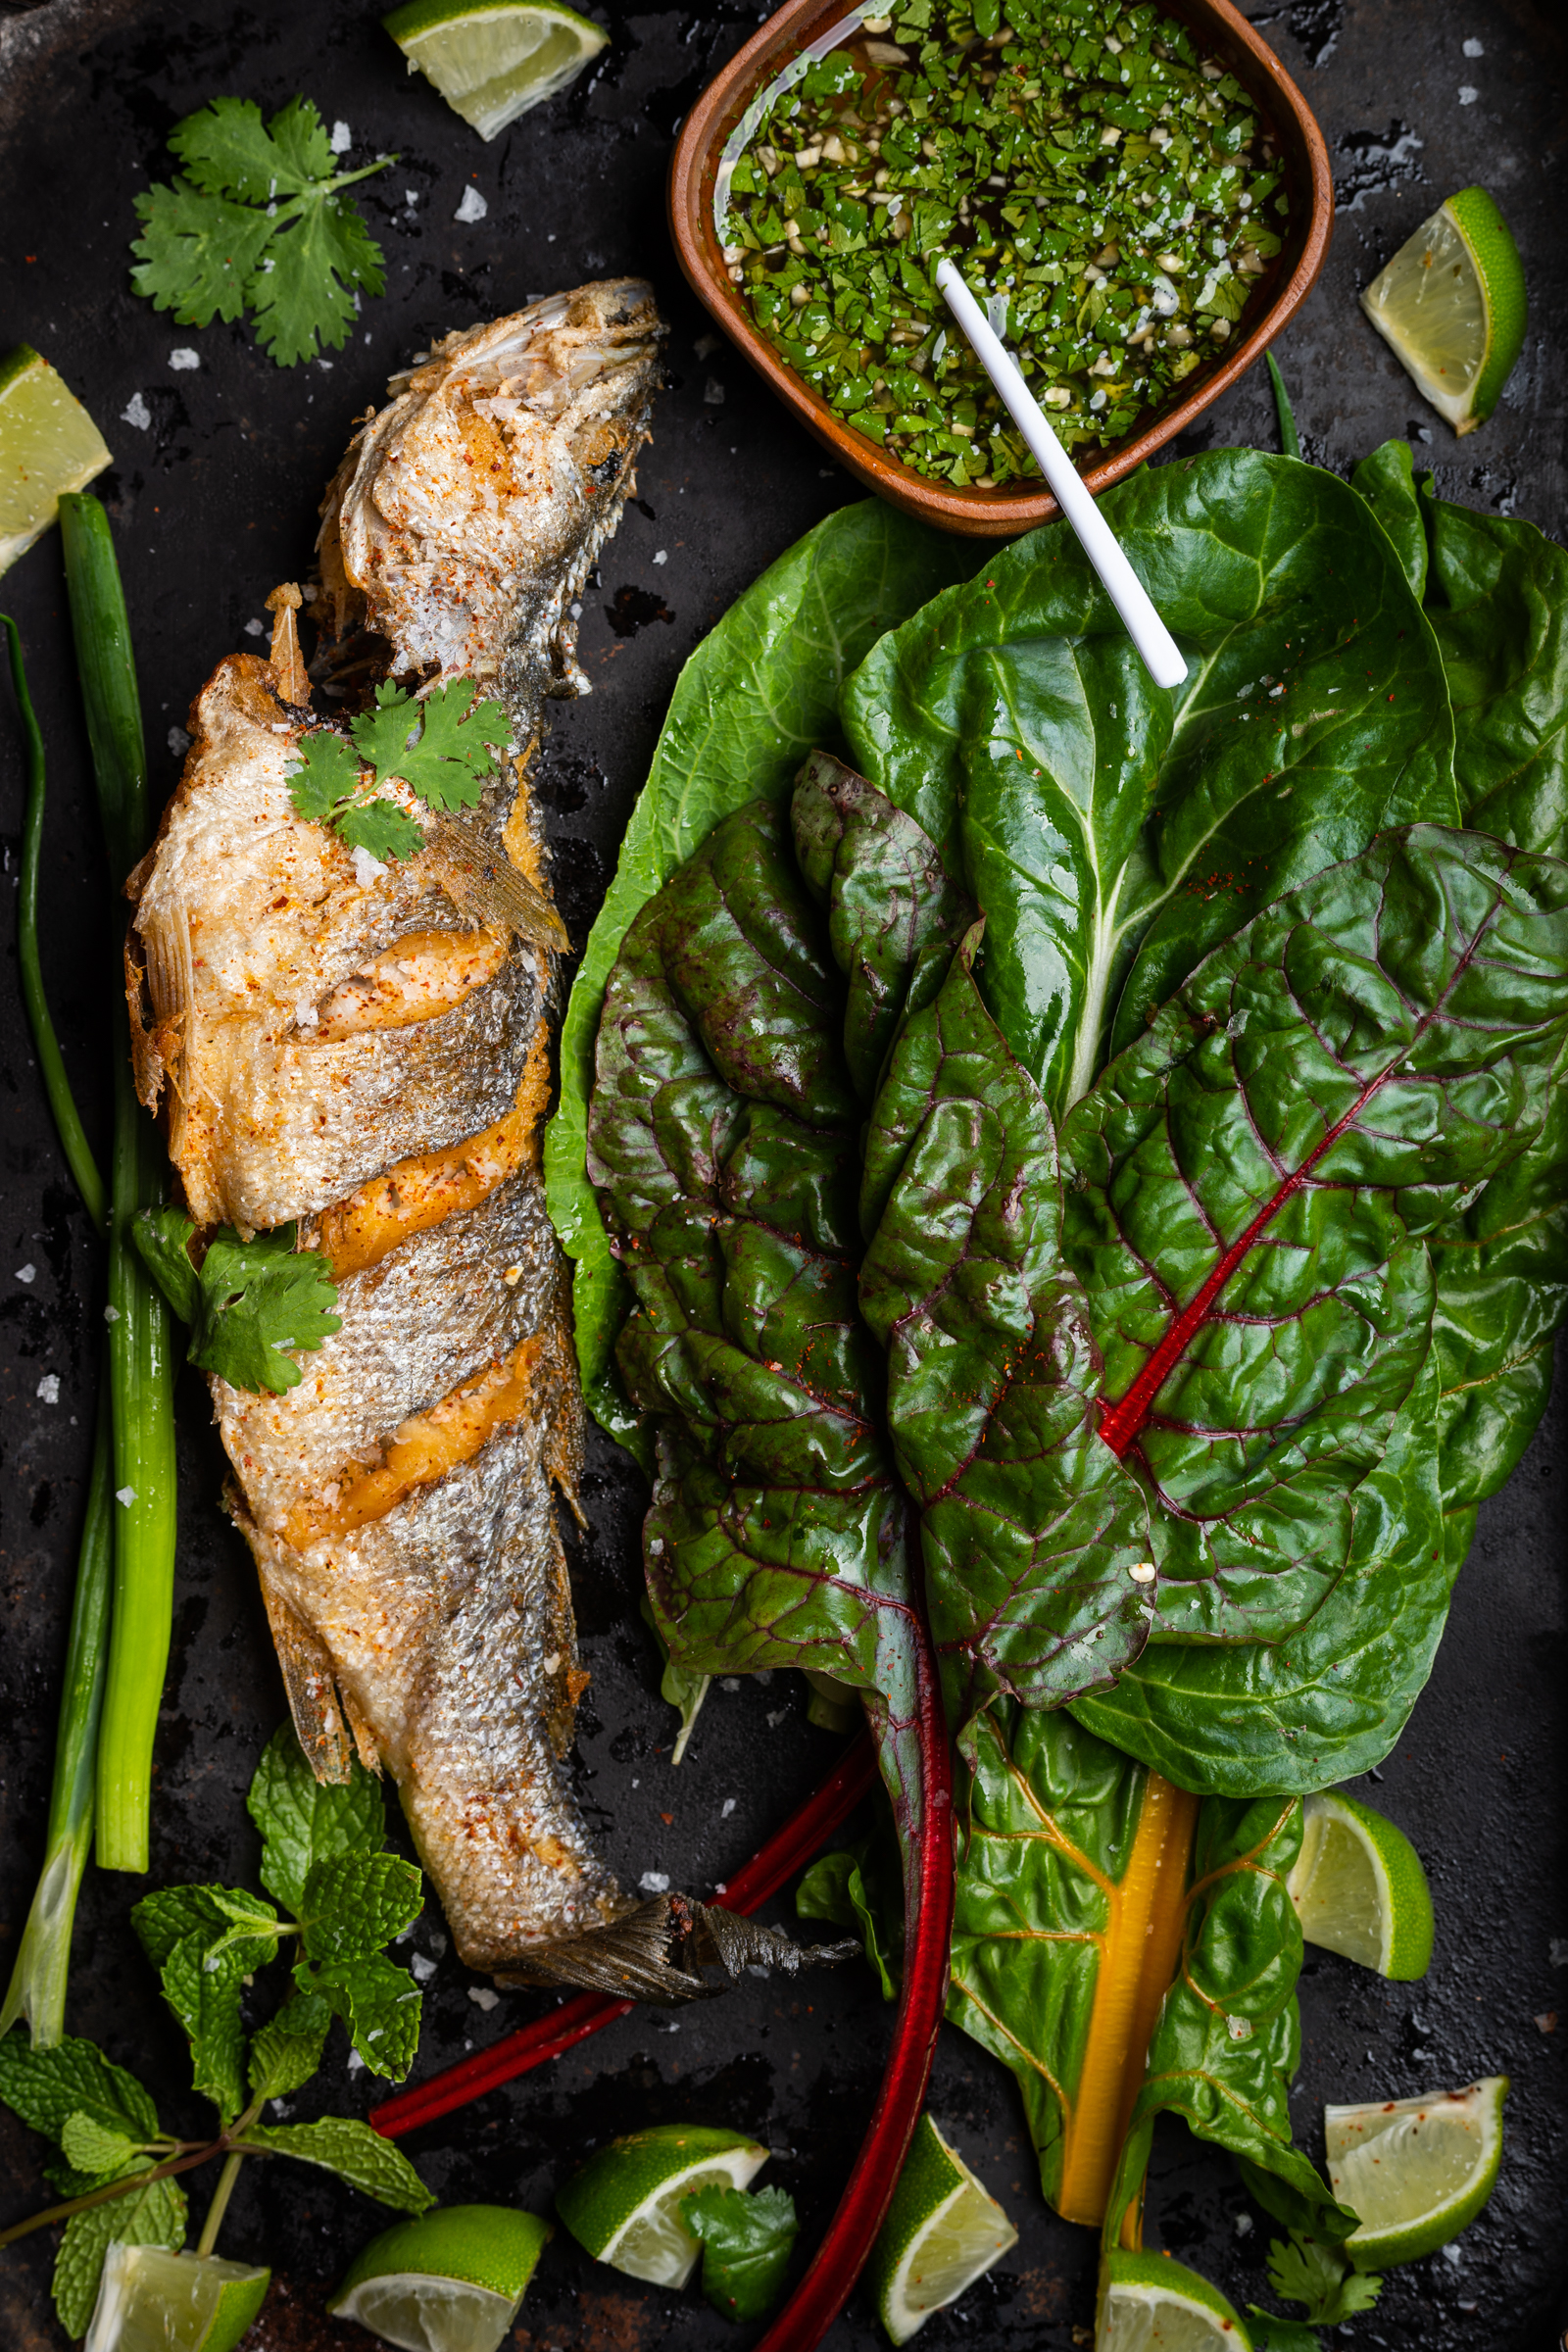 Fried trout with chard and herbs and a Thai-inspired dipping sauce